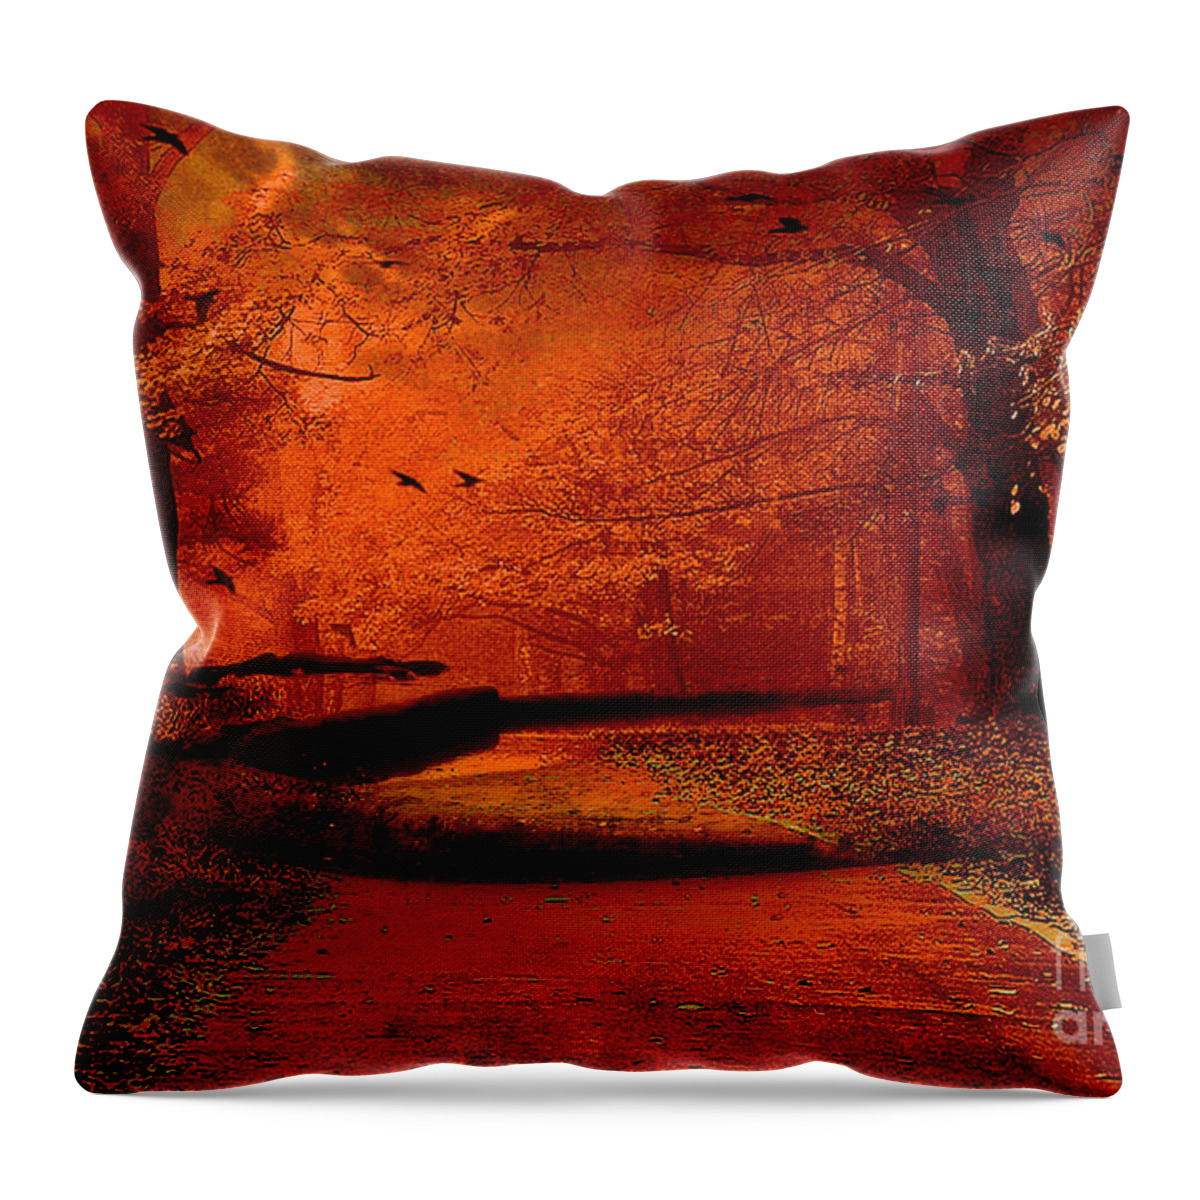 Trees Nature Photos Throw Pillow featuring the photograph Surreal Fantasy Autumn Fall Orange Woods Nature Forest by Kathy Fornal